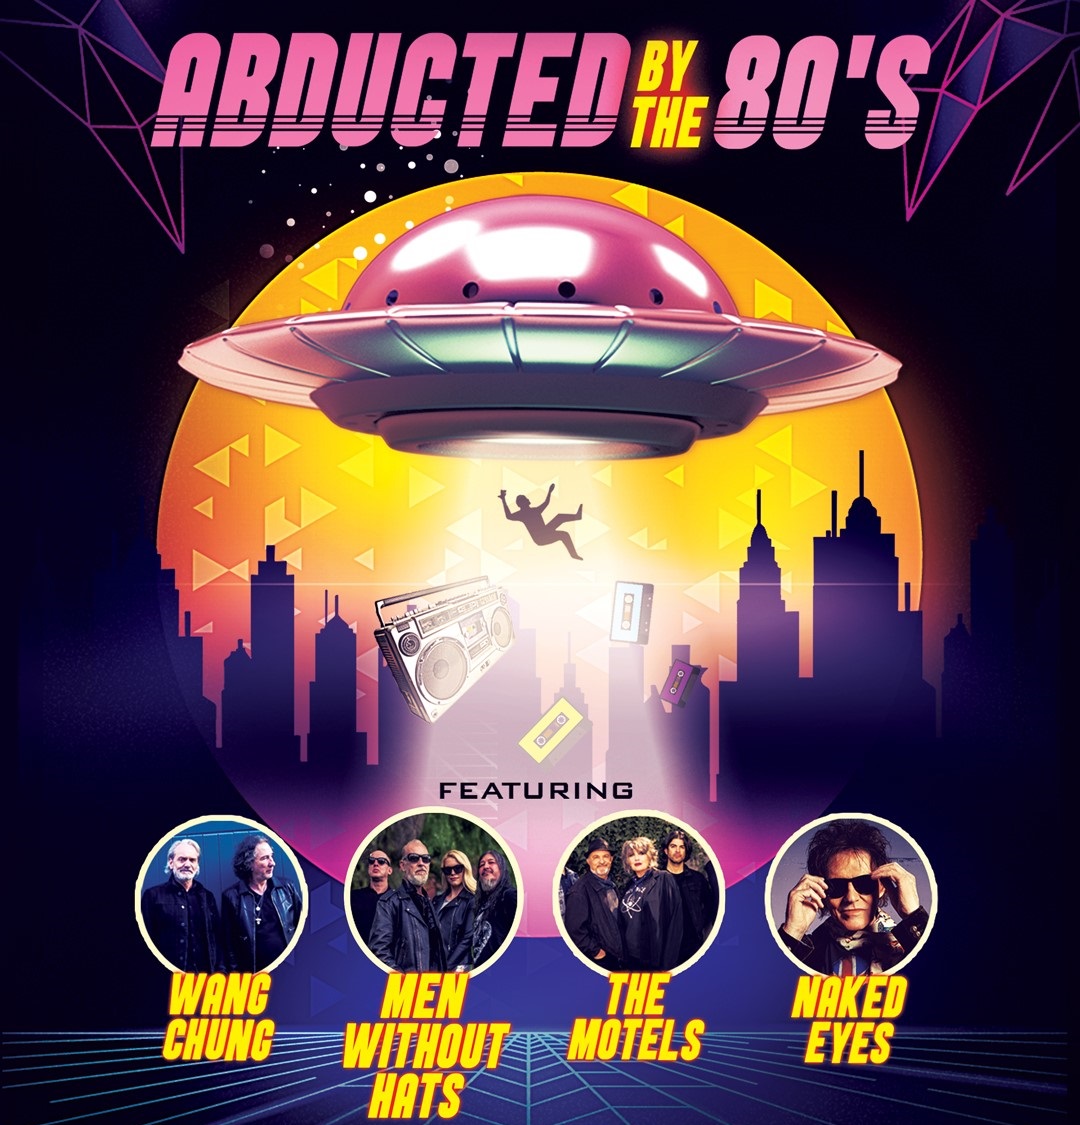 '80s POP HITMAKERS WANG CHUNG, MEN WITHOUT HATS, THE MOTELS, AND NAKED EYES ANNOUNCE THE “ABDUCTED BY THE '80s” TOUR